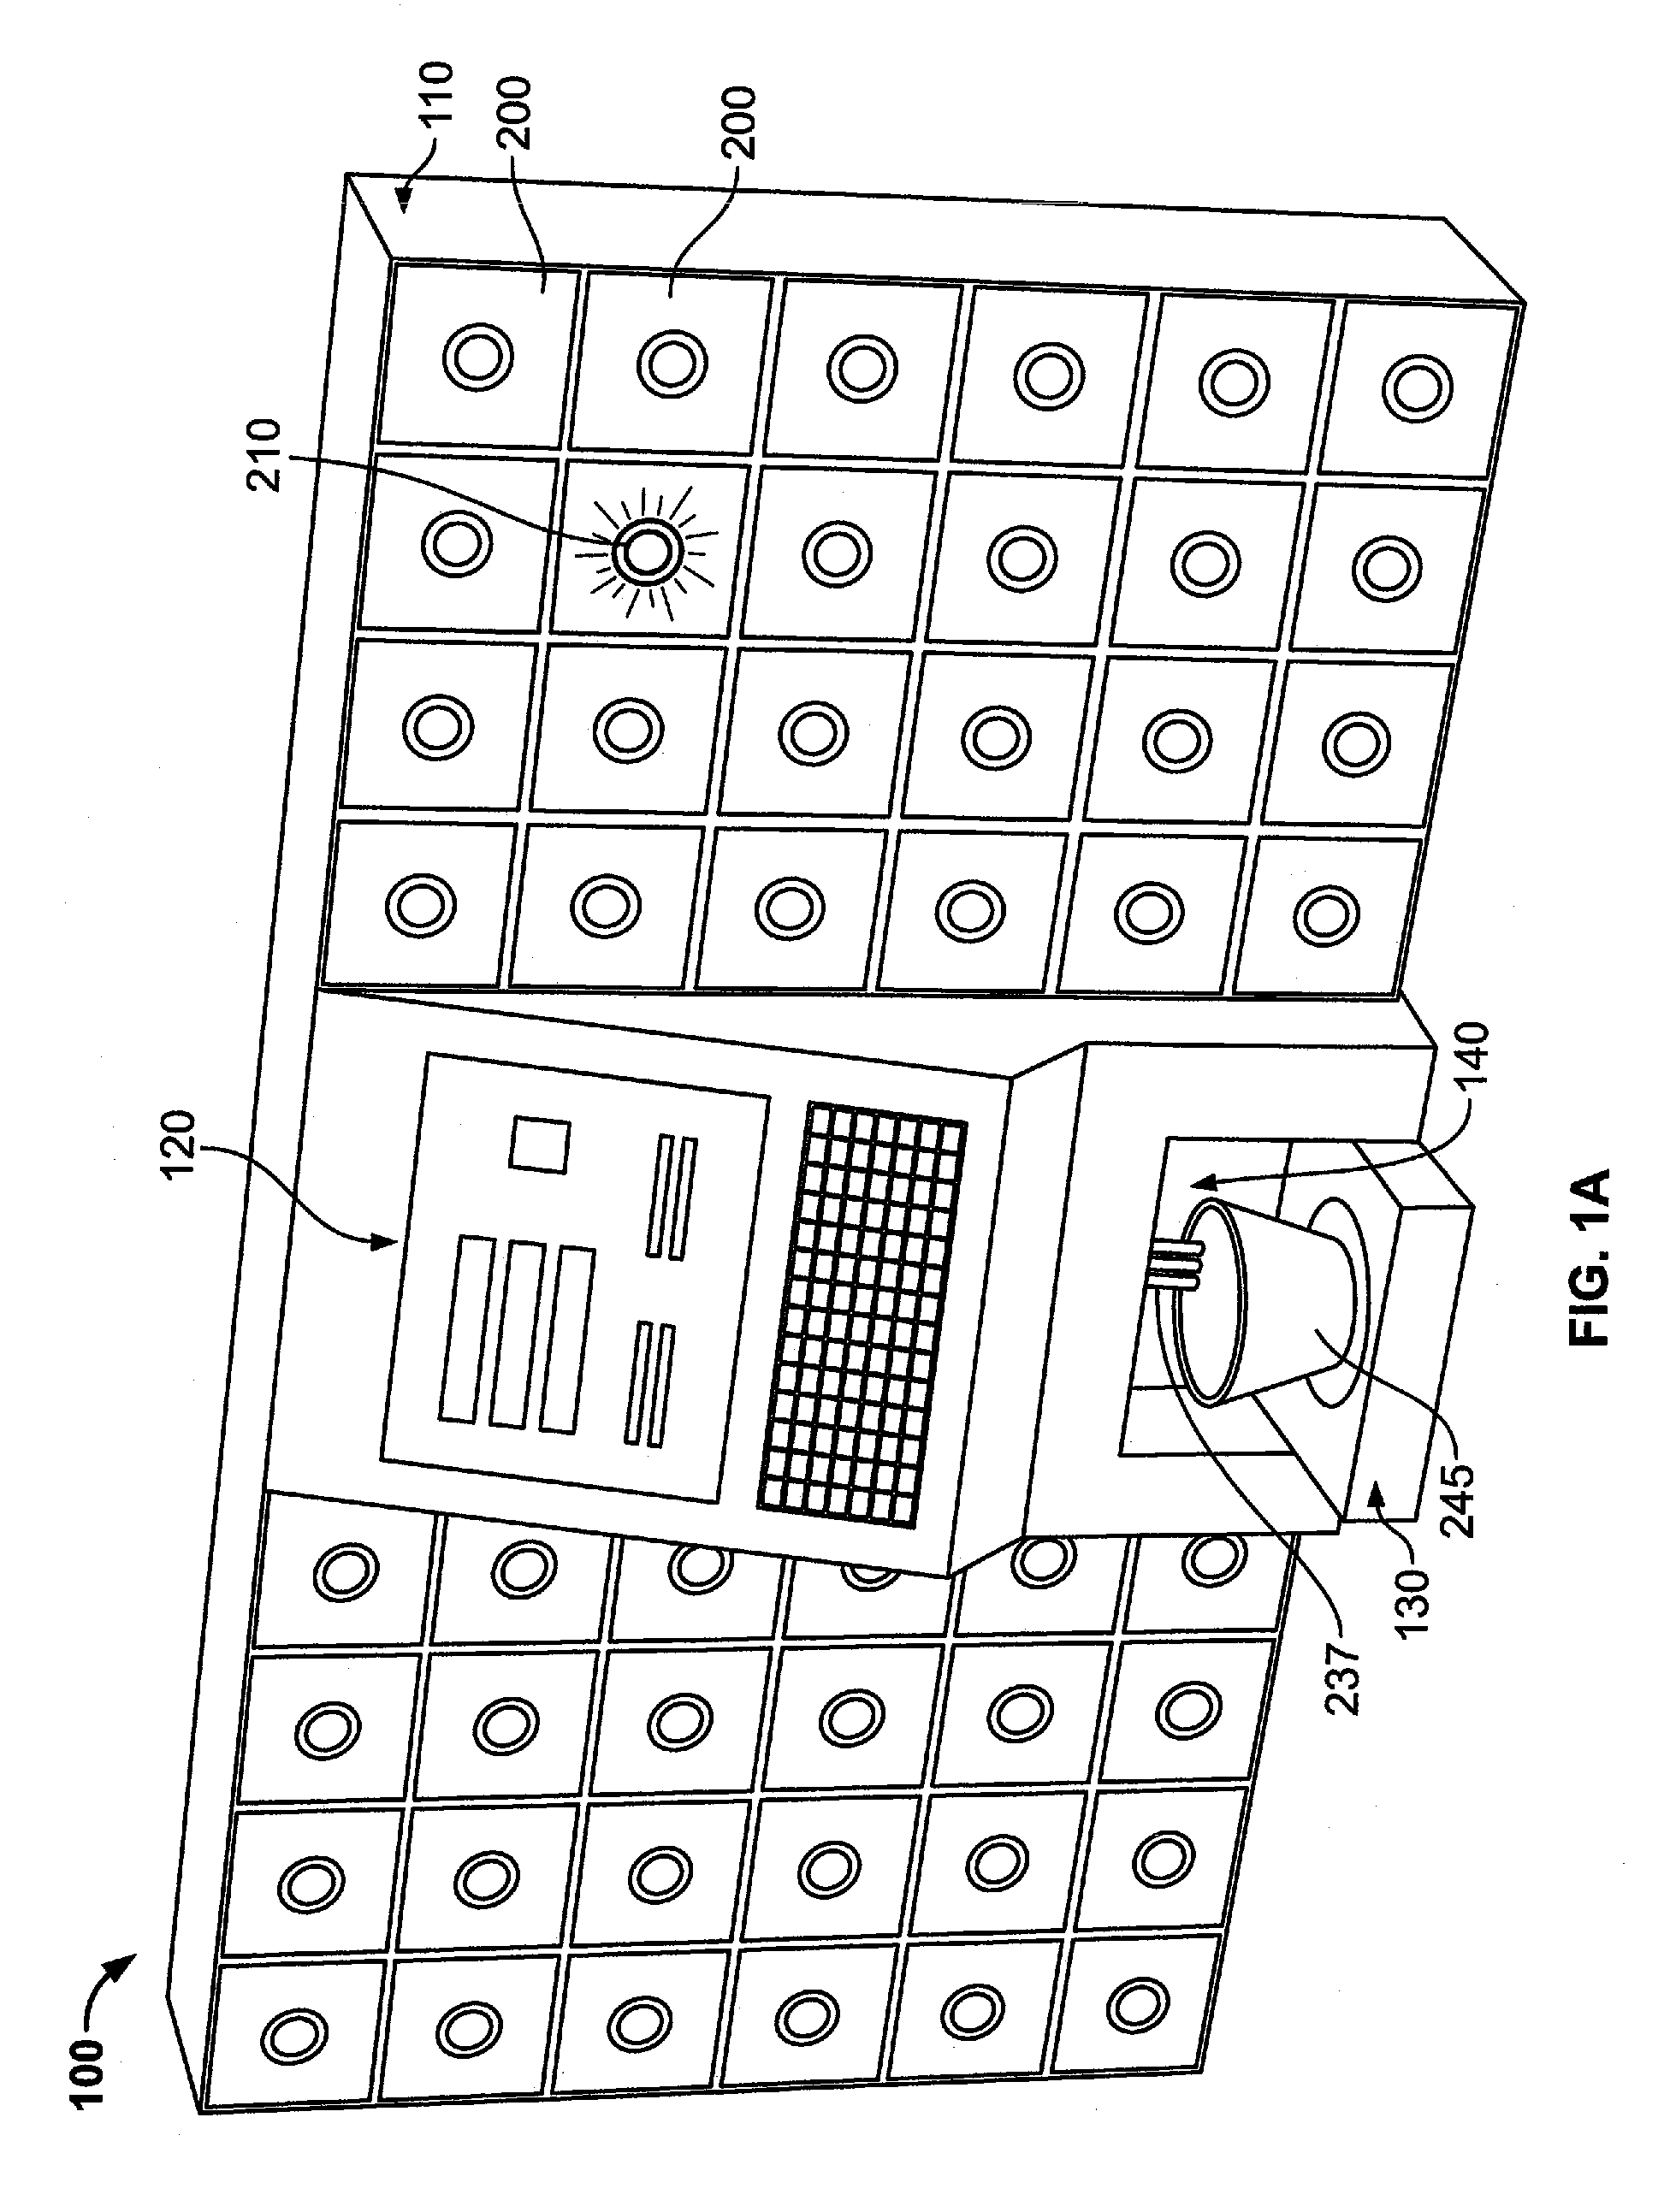 Manual hair dye apparatus and method for using the same